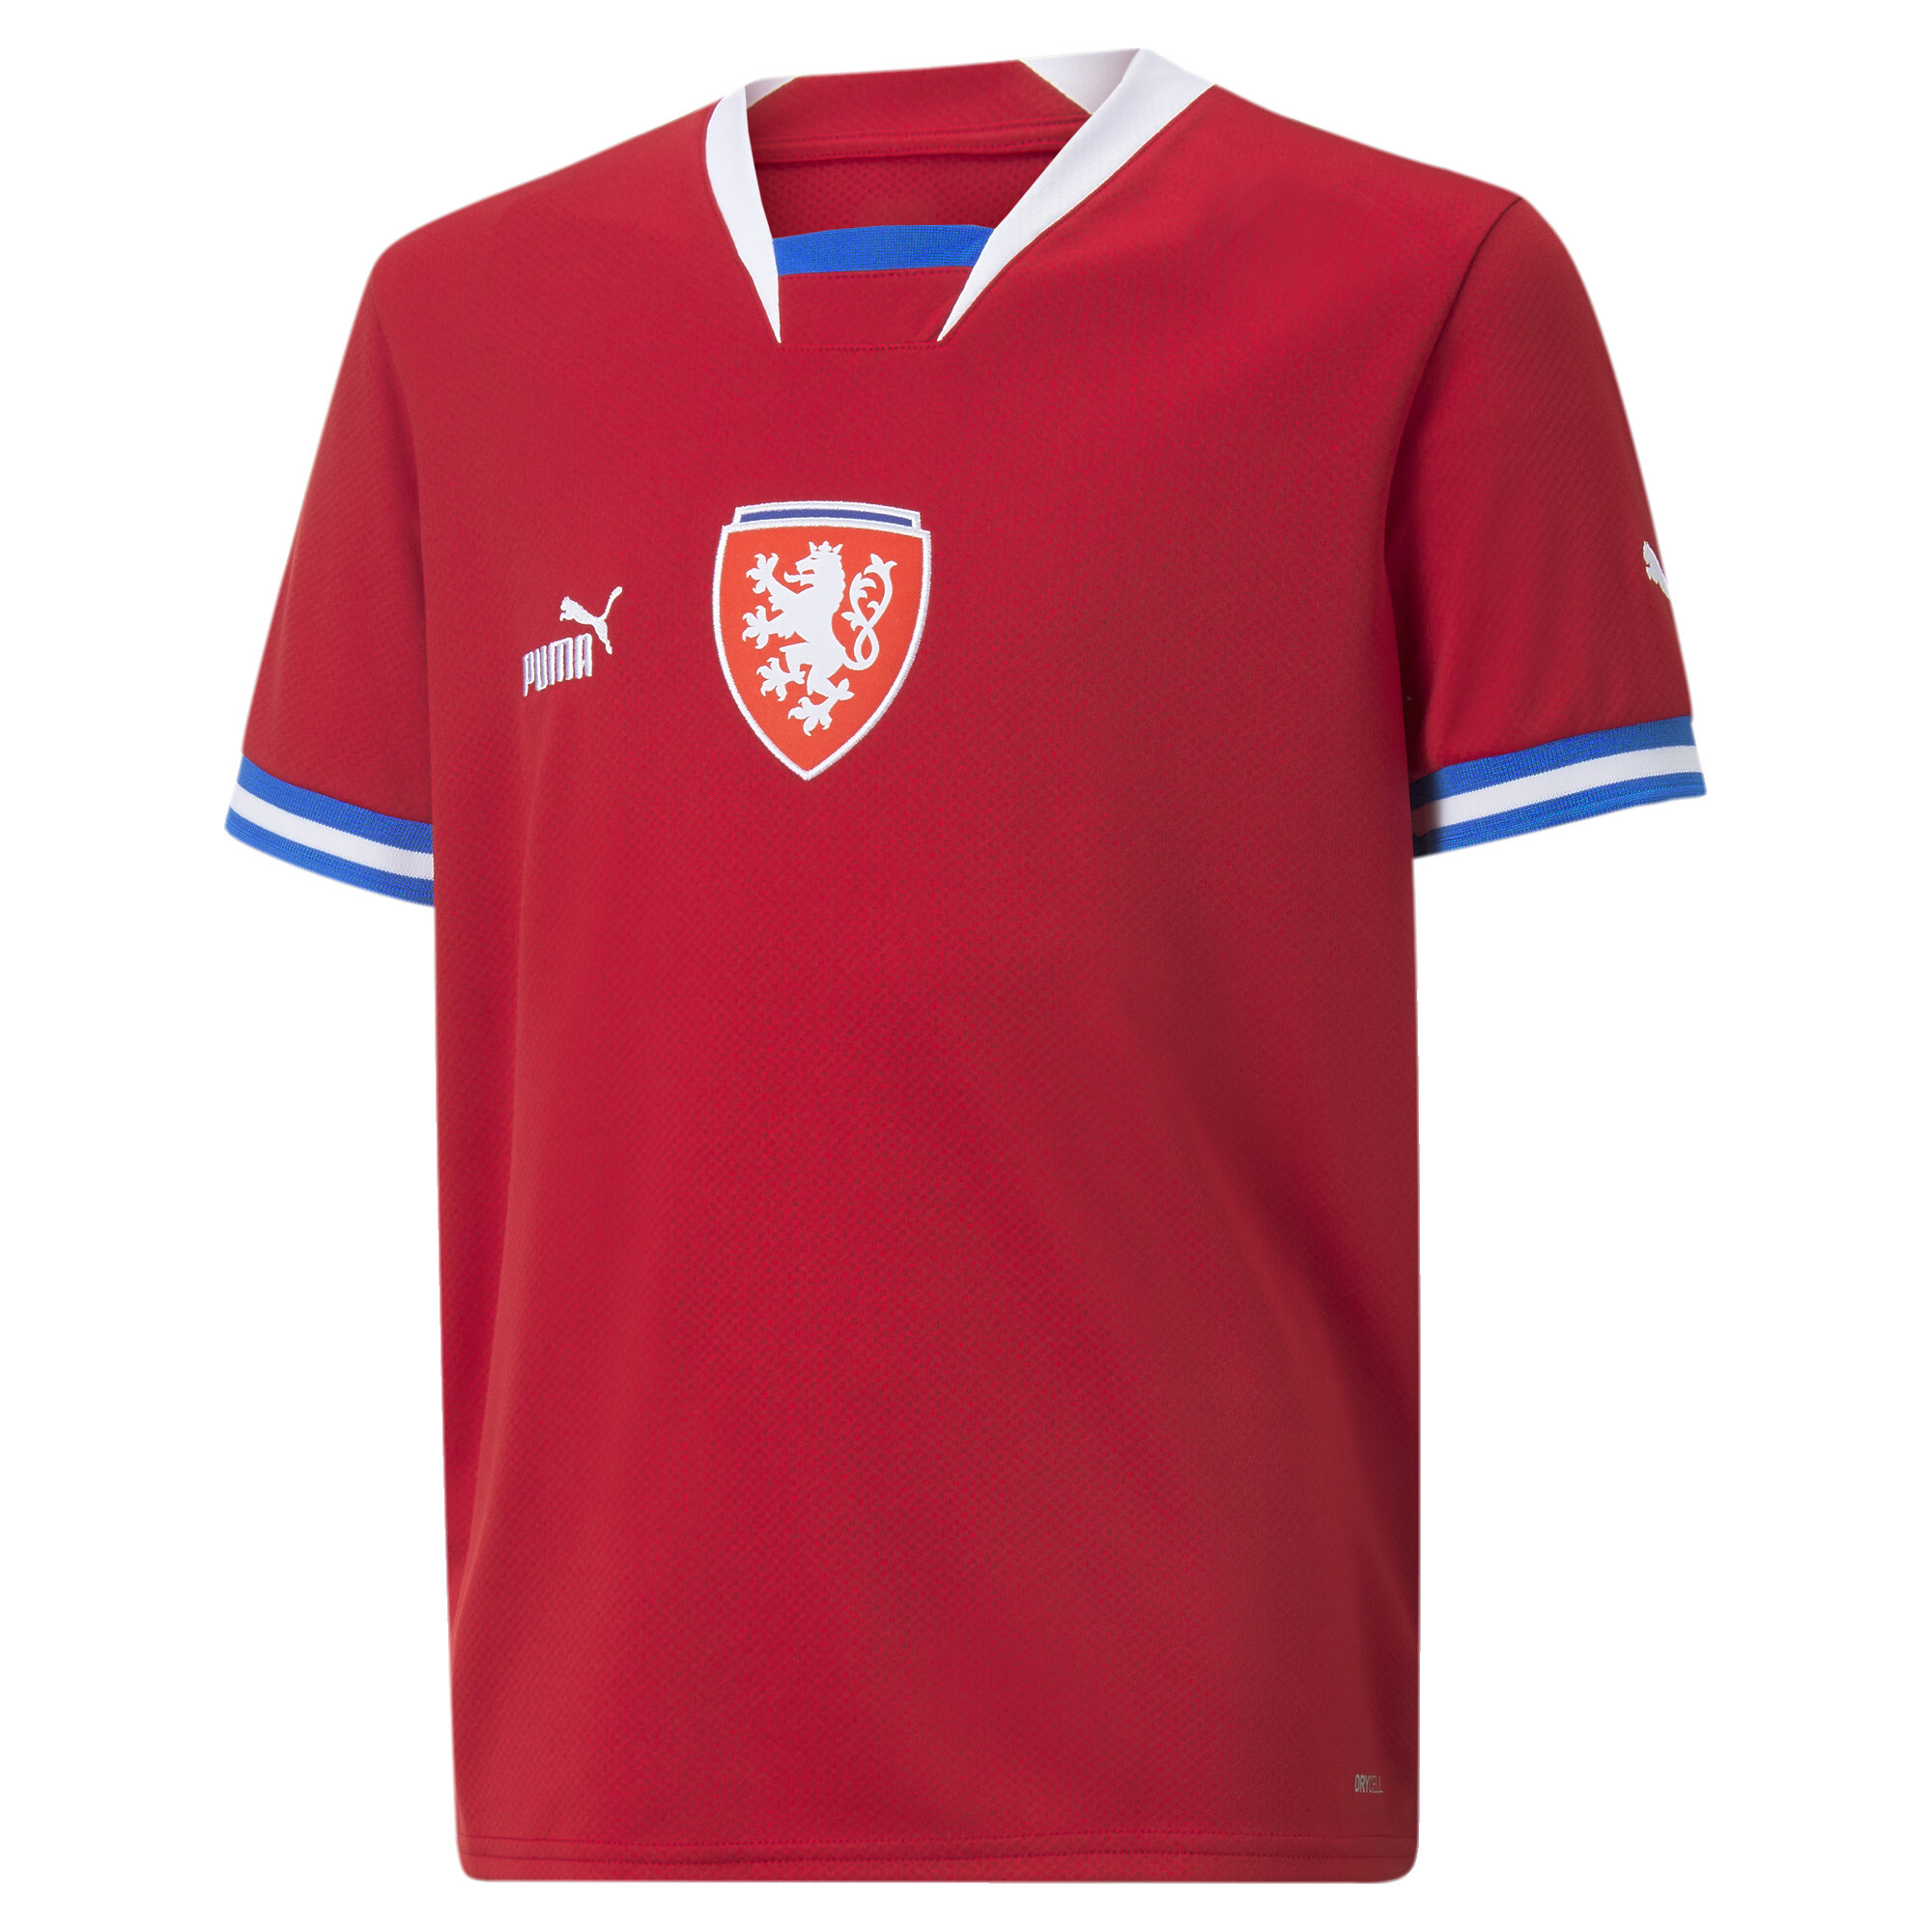 Men's Puma Czech Republic Home 22/23 Replica Jersey Youth, Red, Size 5-6Y, Clothing